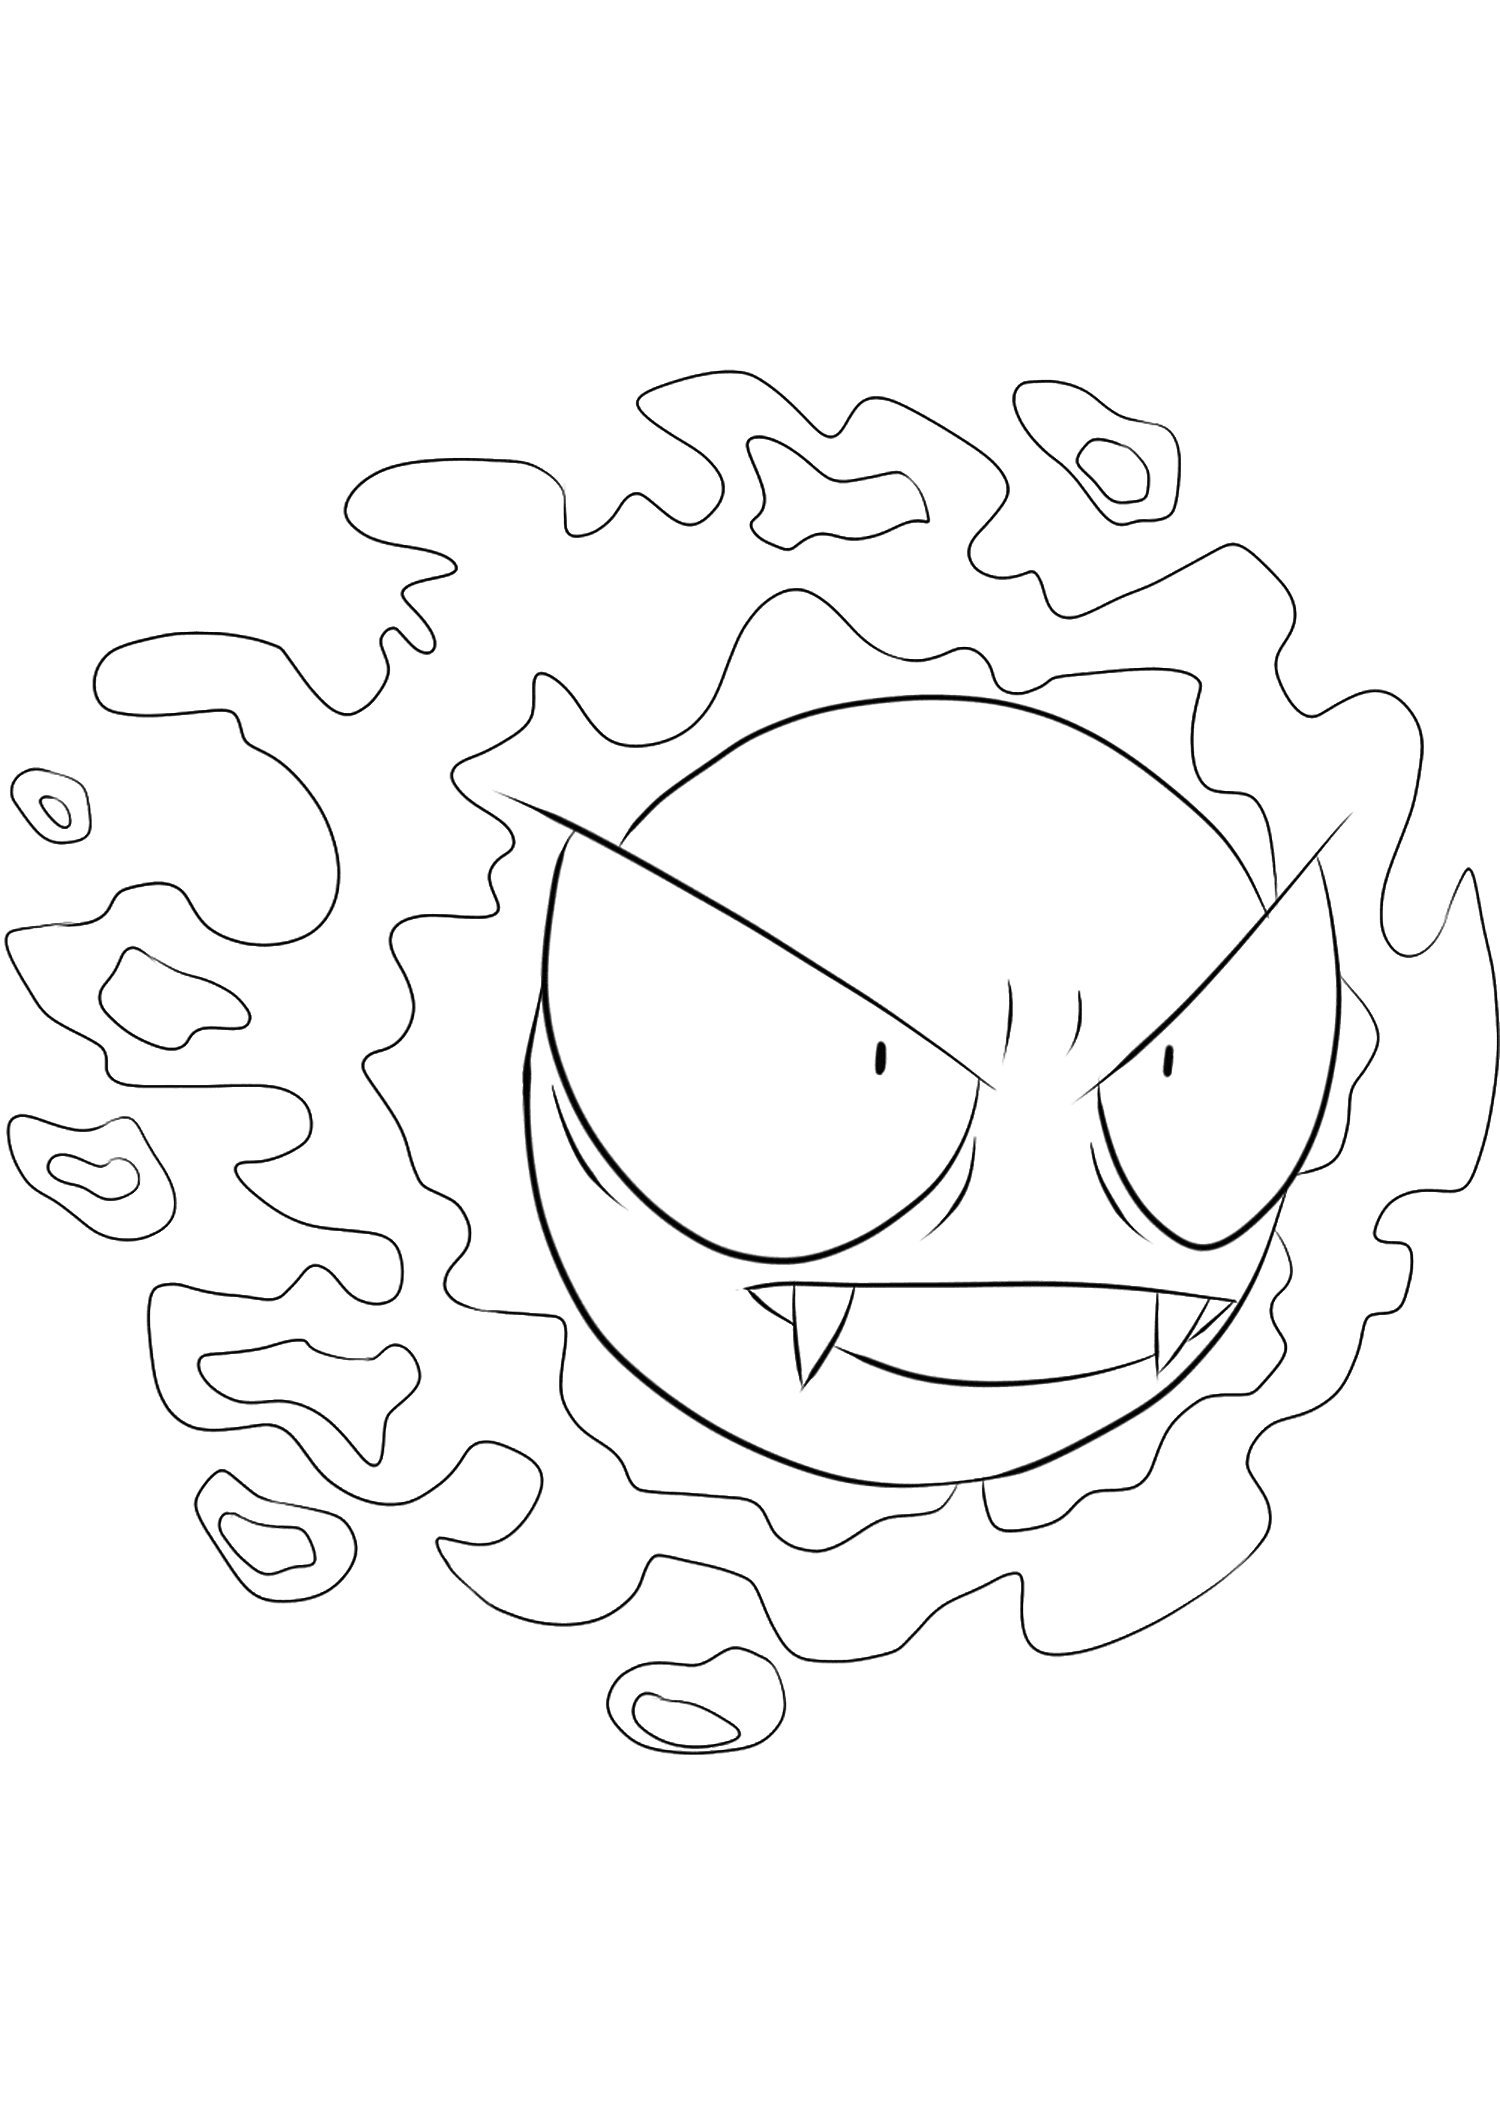 Ghost Pokemon Coloring Pages - Super Kins Author